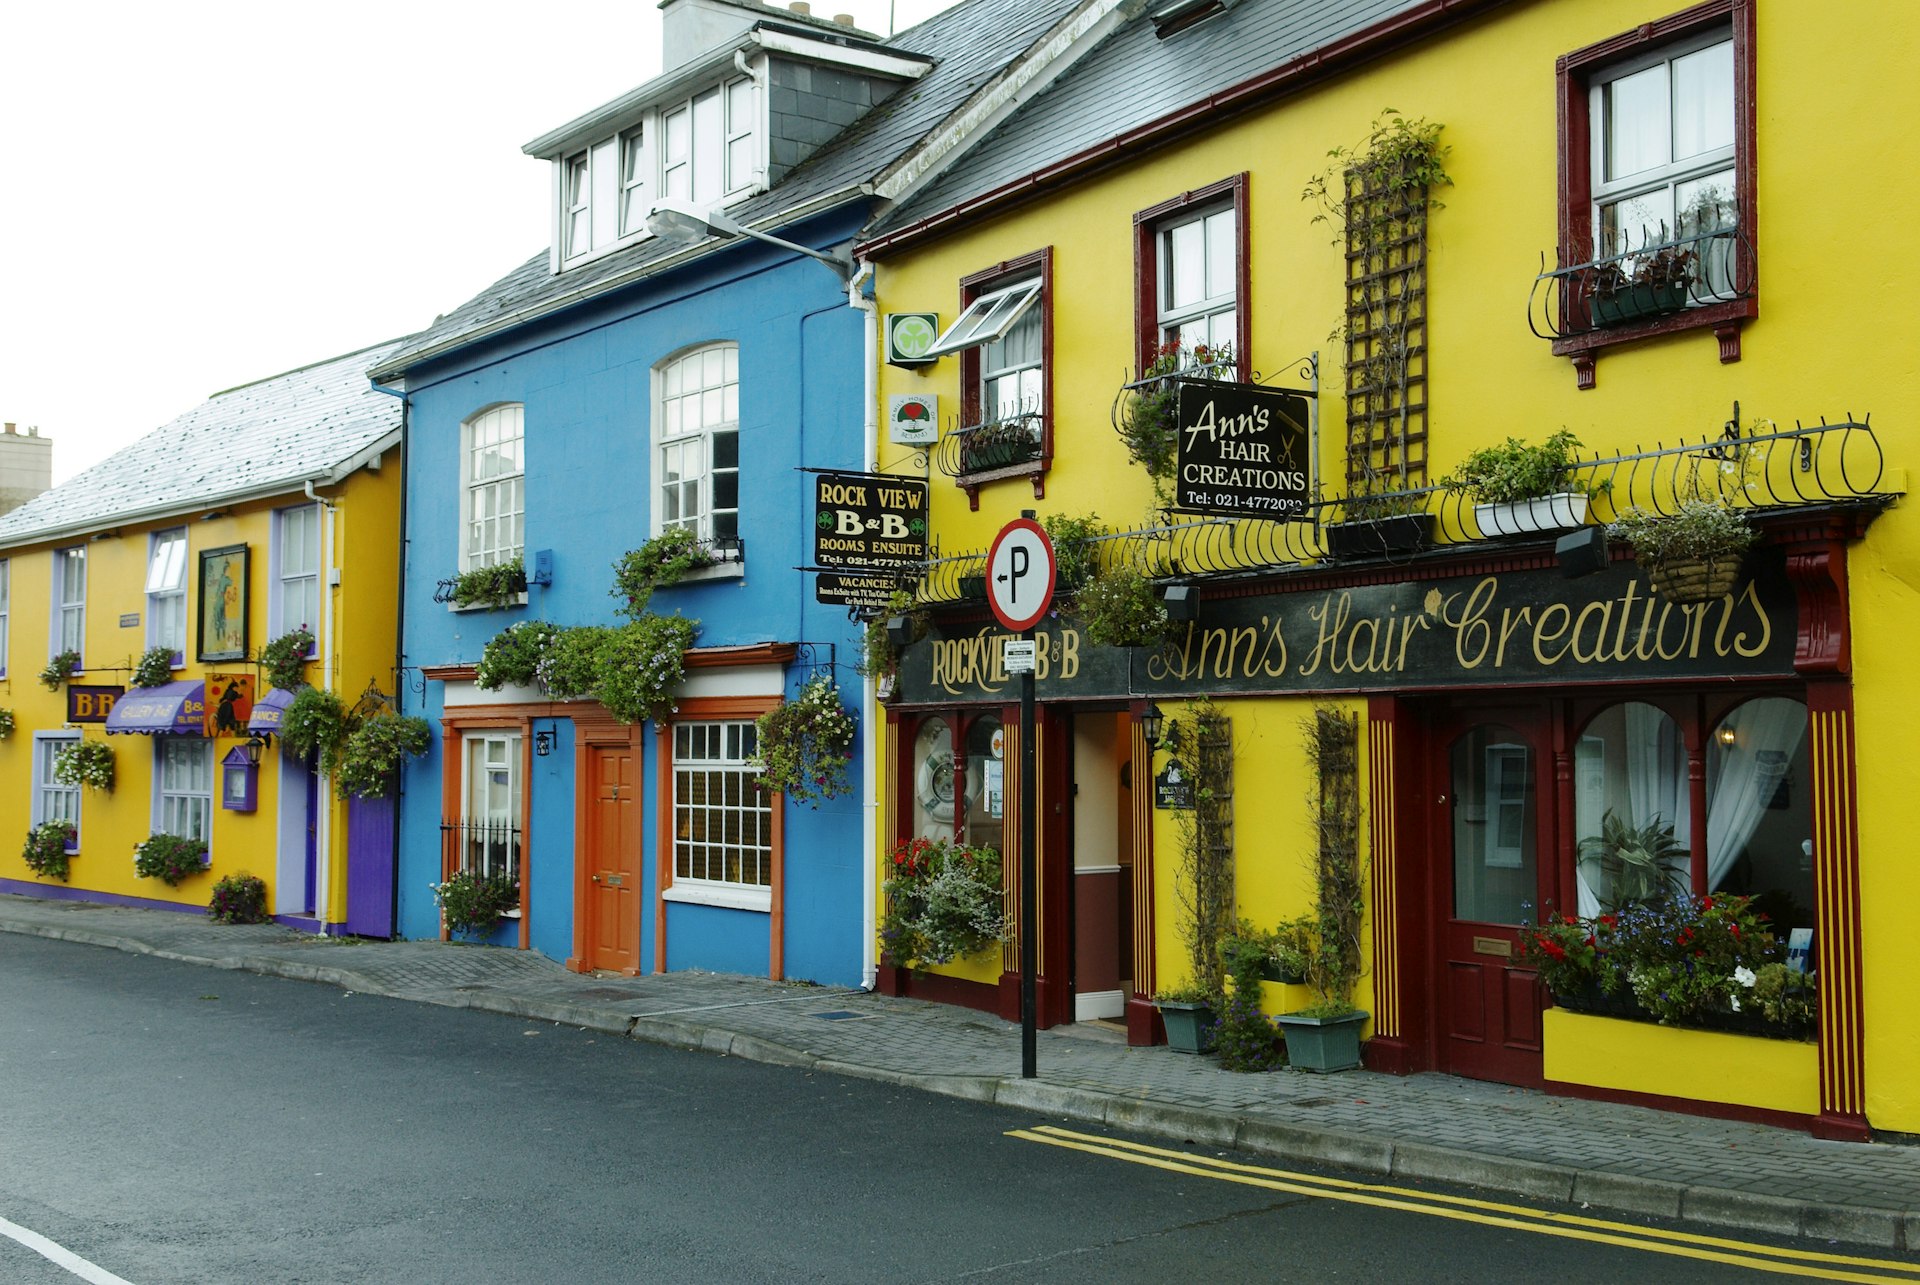 Colorful buildings along the streets of of the charming seaside village of Kinsale County Cork Ireland